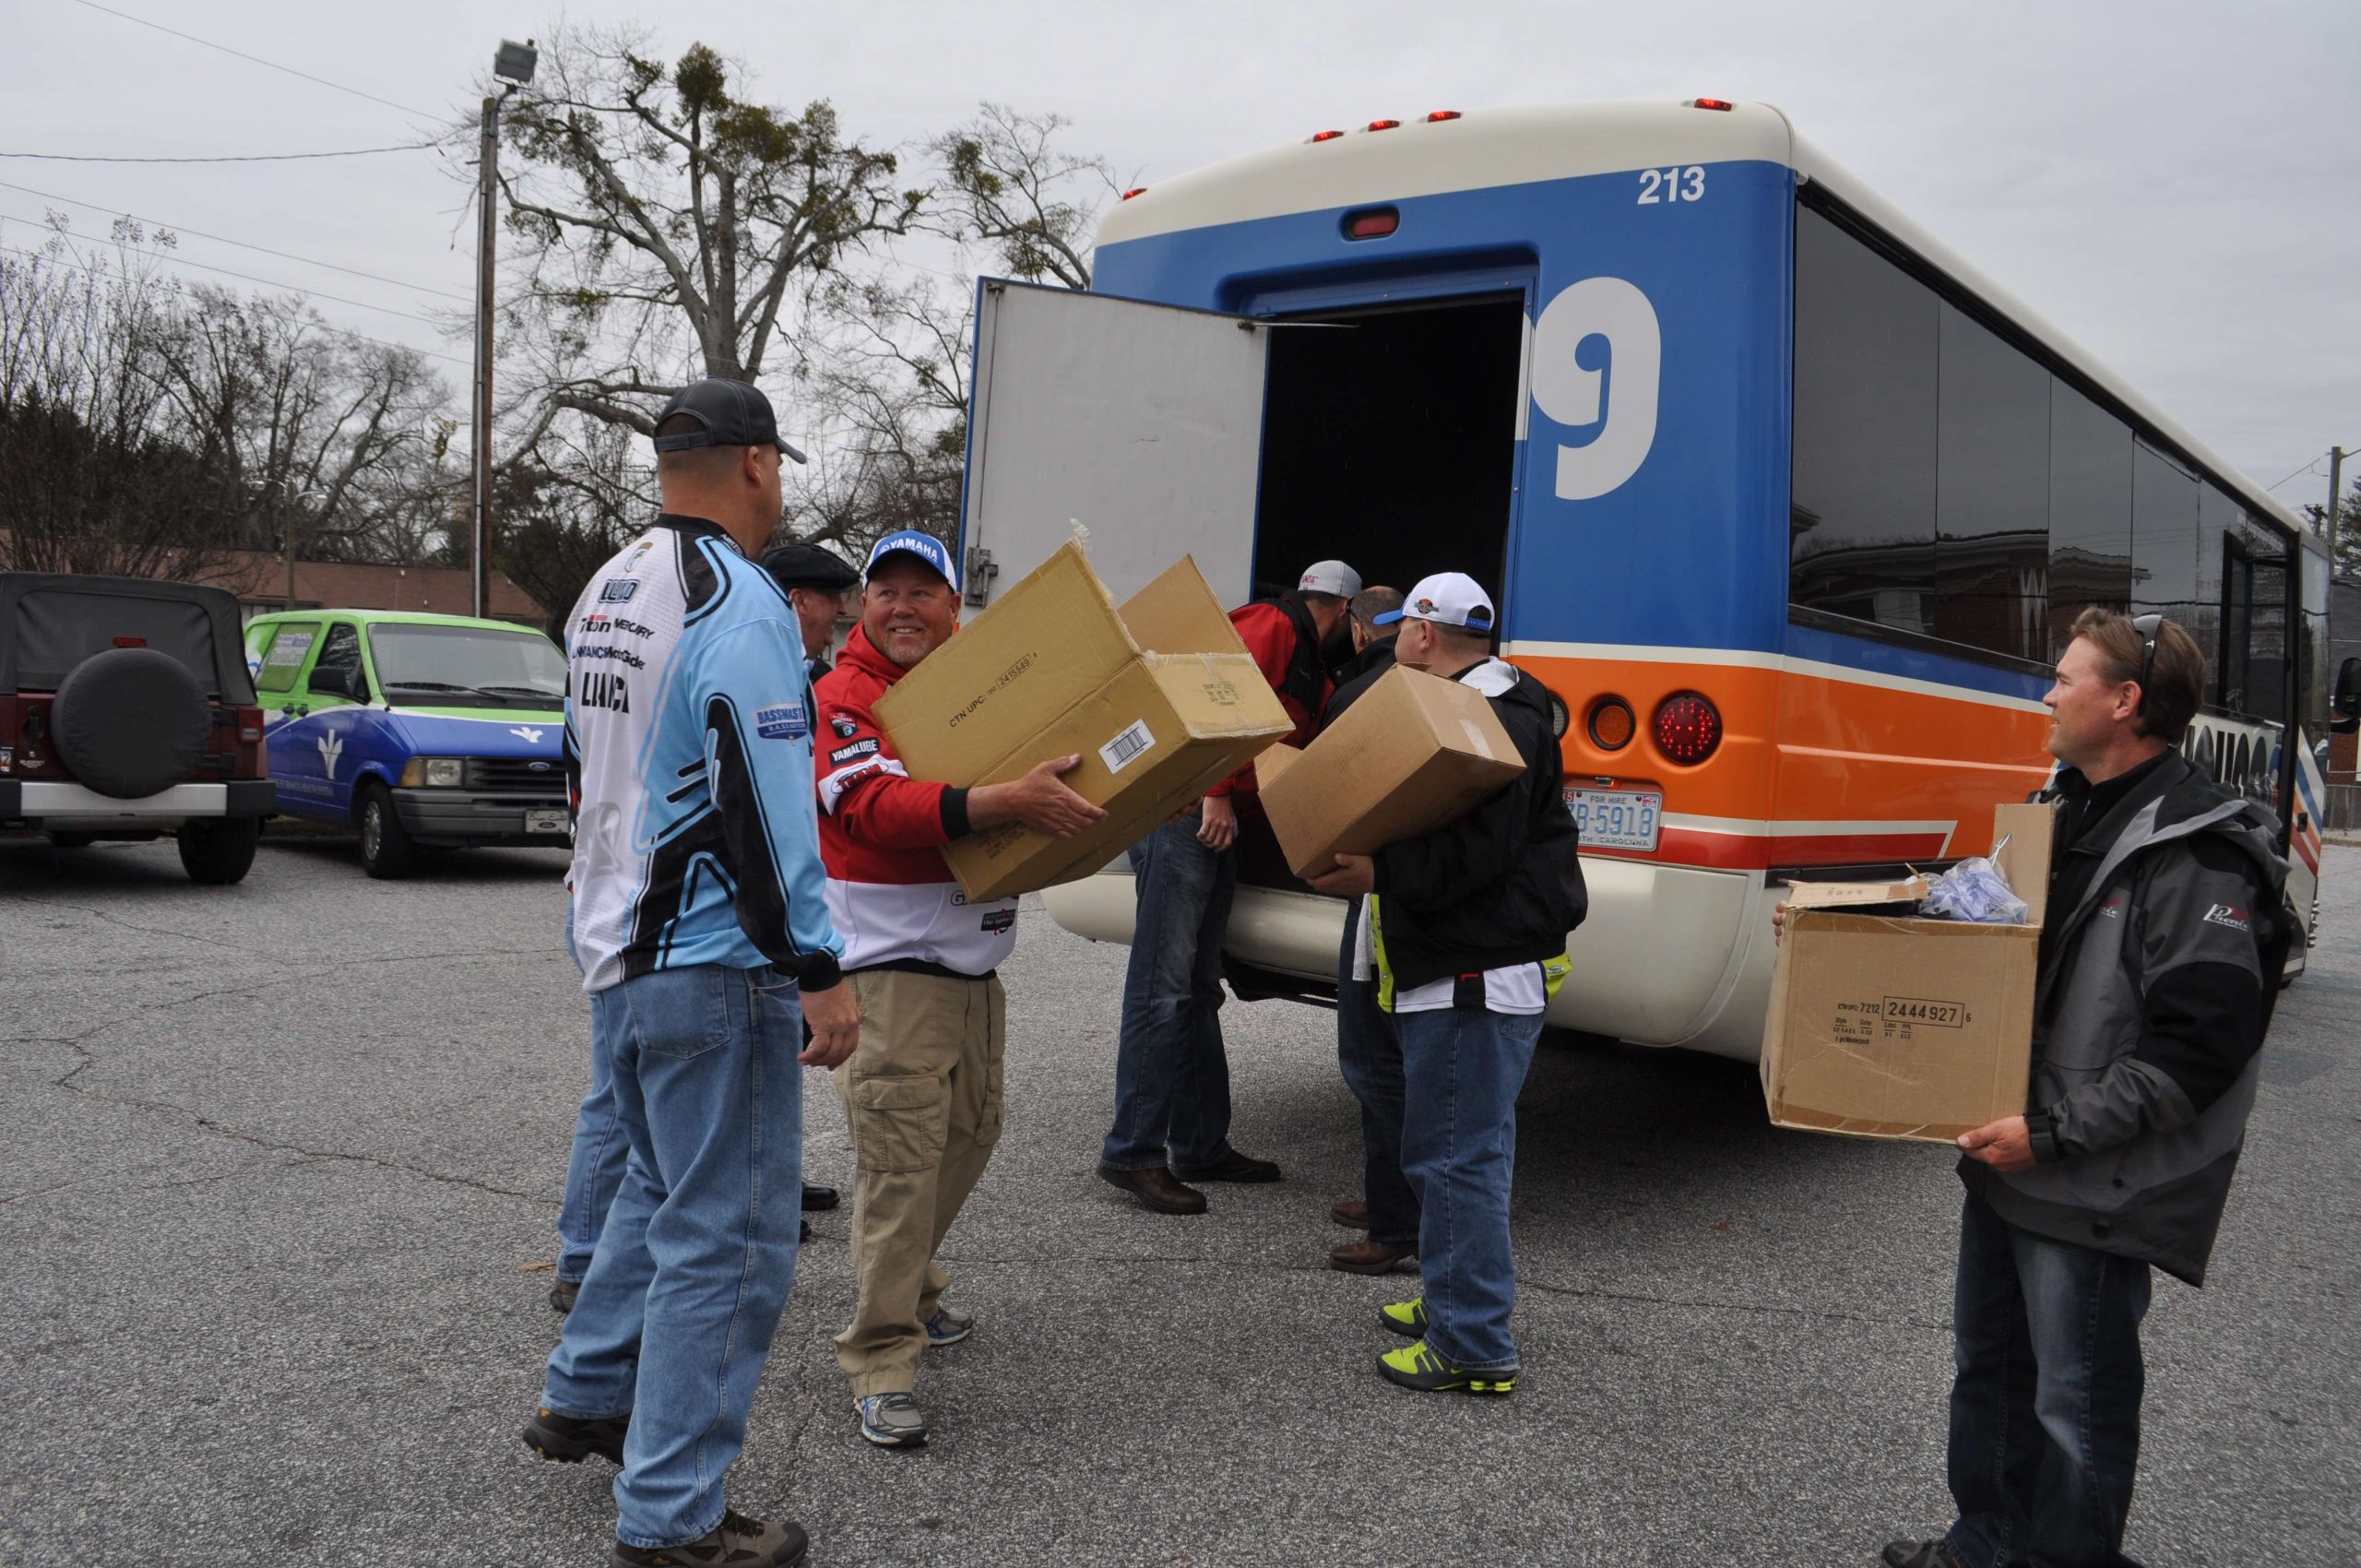 Prizes from Yamaha, Skeeter, Carhartt, Pure Fishing and Dick's Sporting Goods were unloaded from the angler bus.